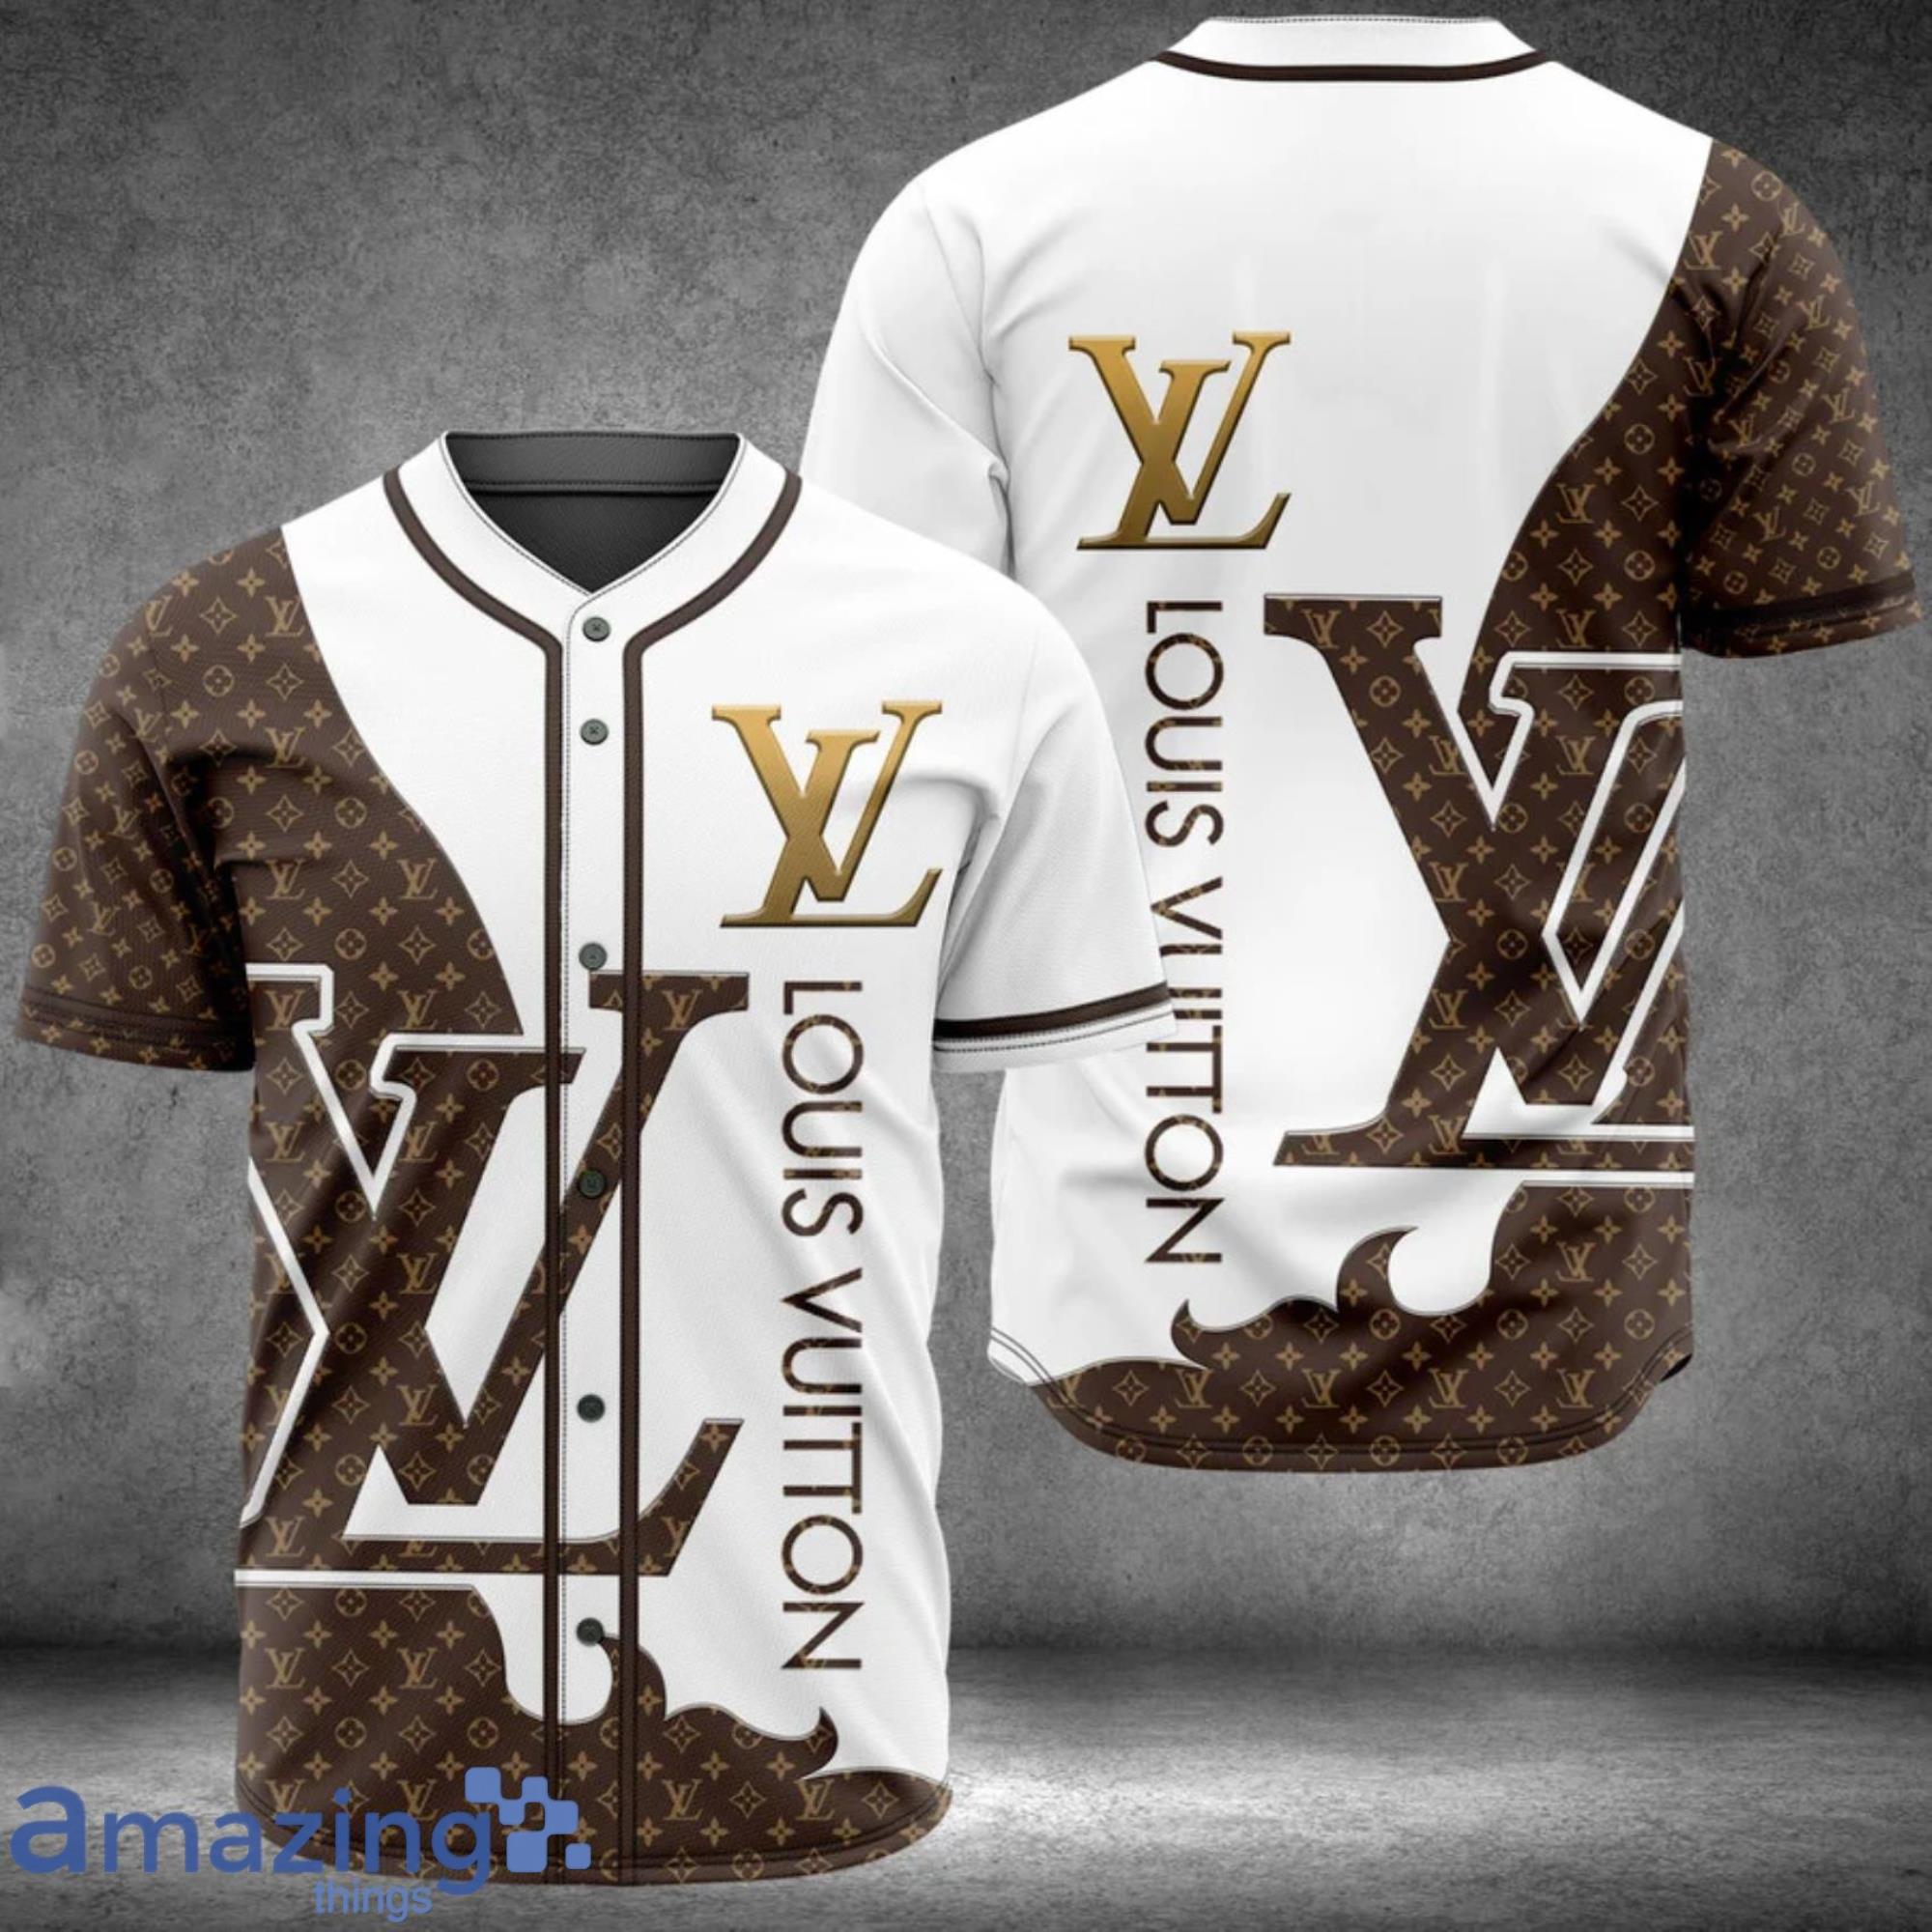 Louis Vuitton Baseball Jersey Clothes Sport Outfit For Men Women Style 6